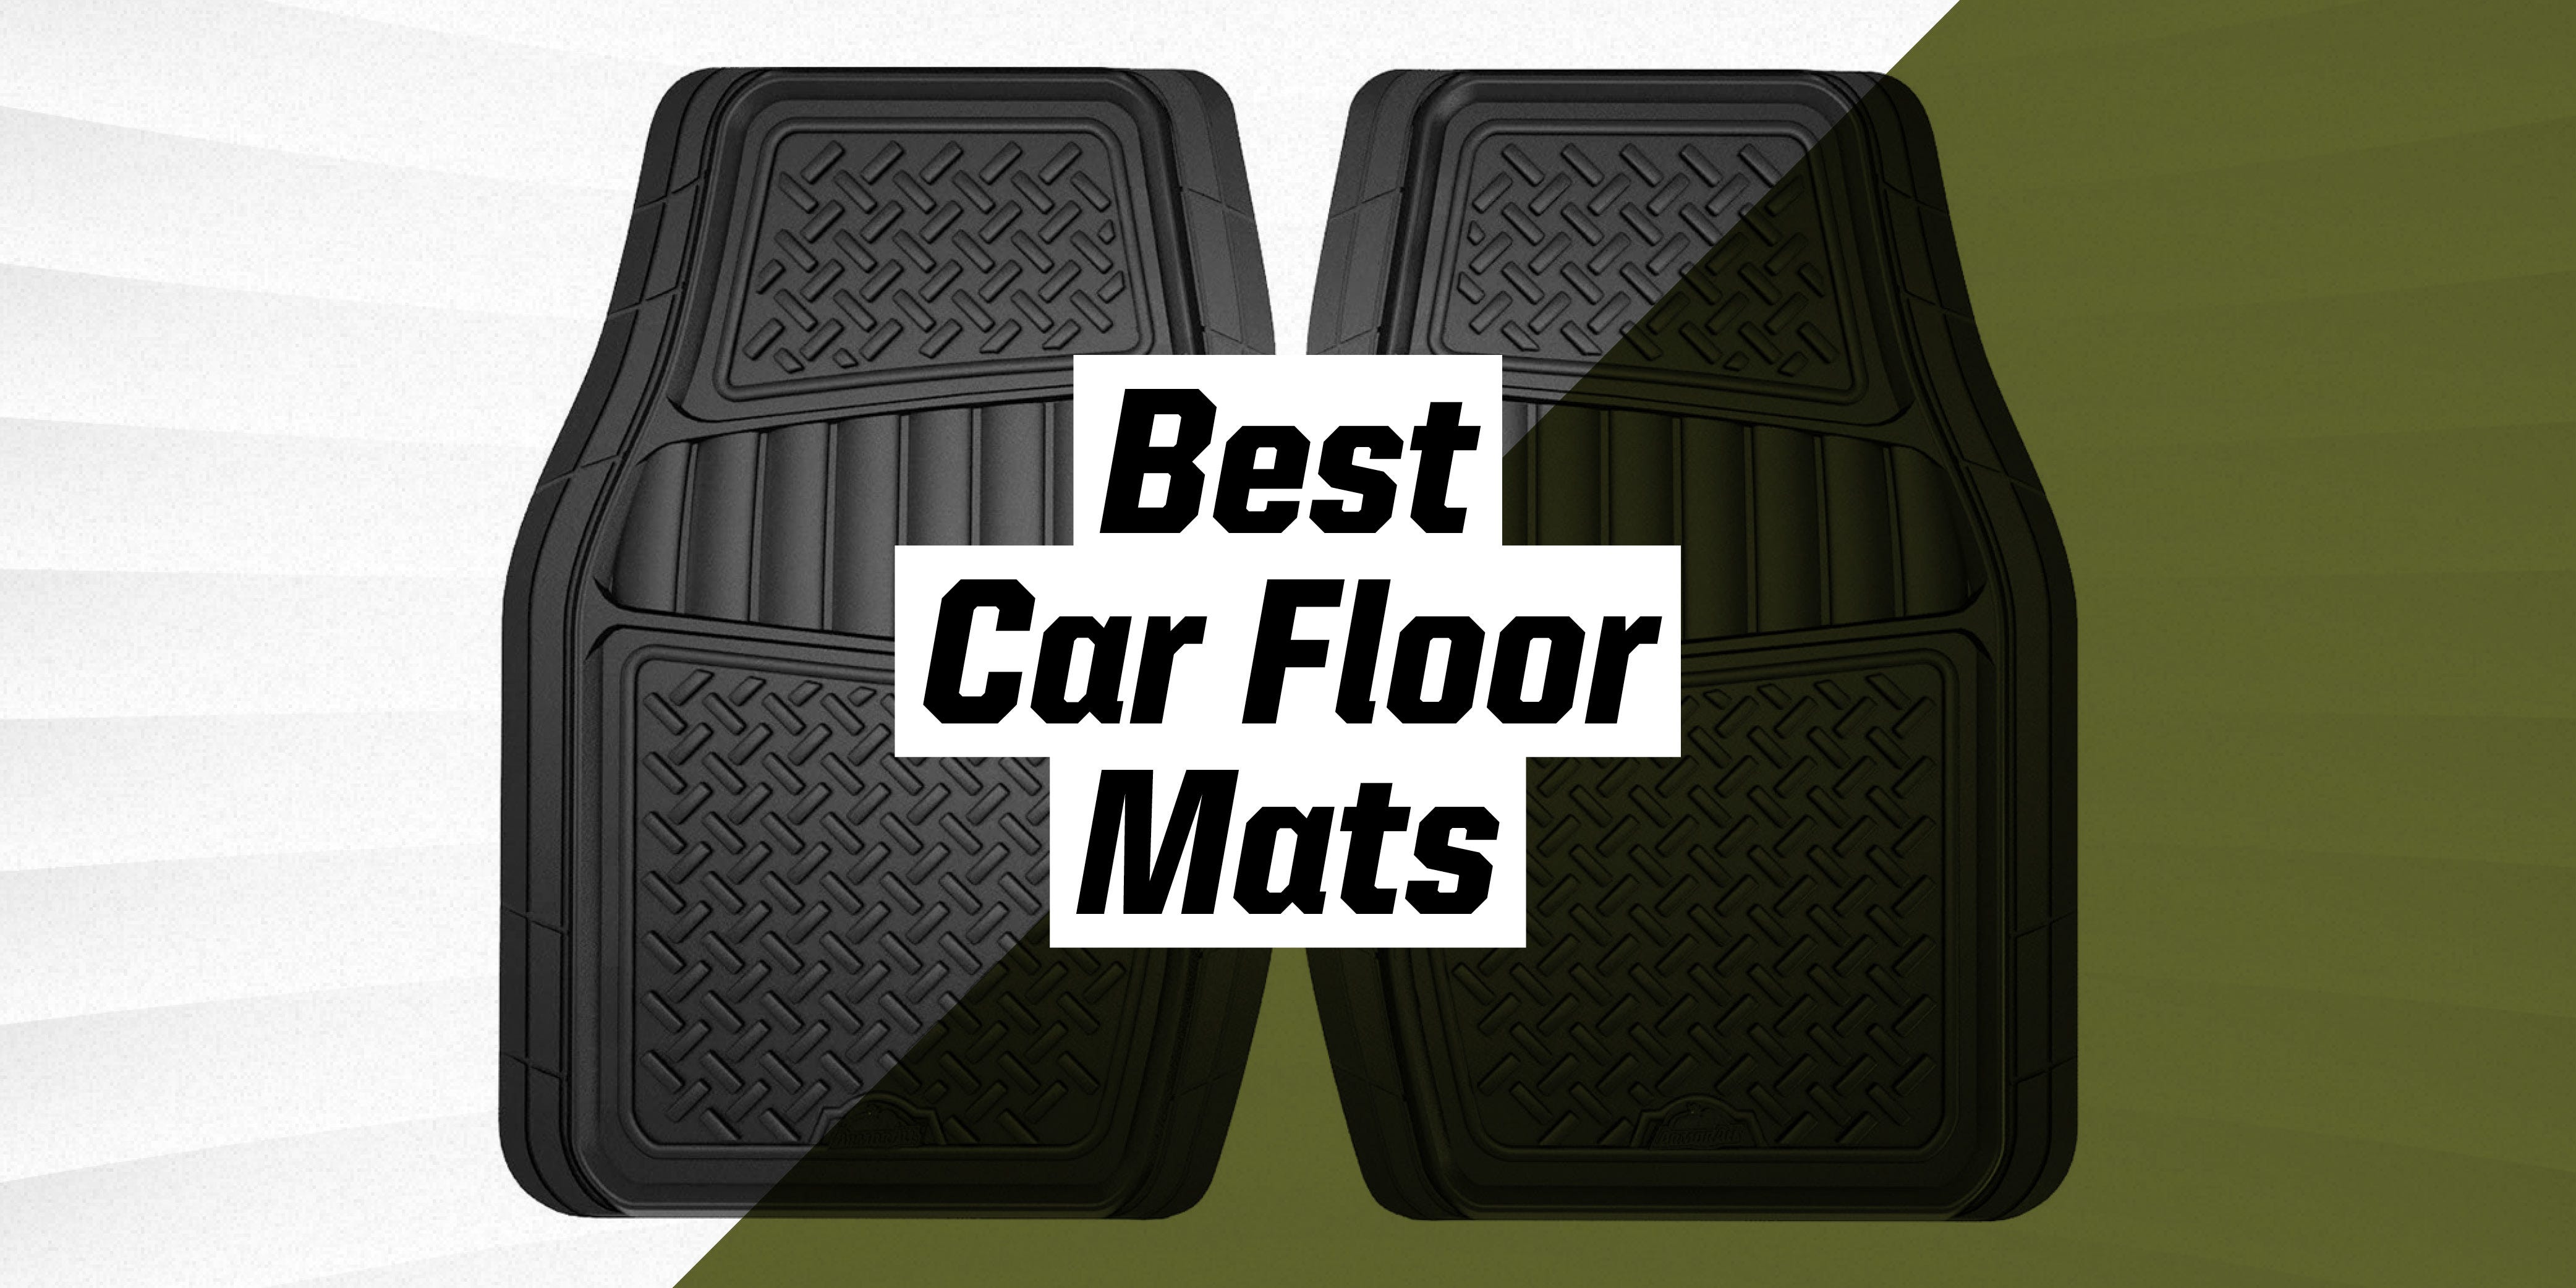 Protect Your Ride With These Top-Rated Car Floor Mats